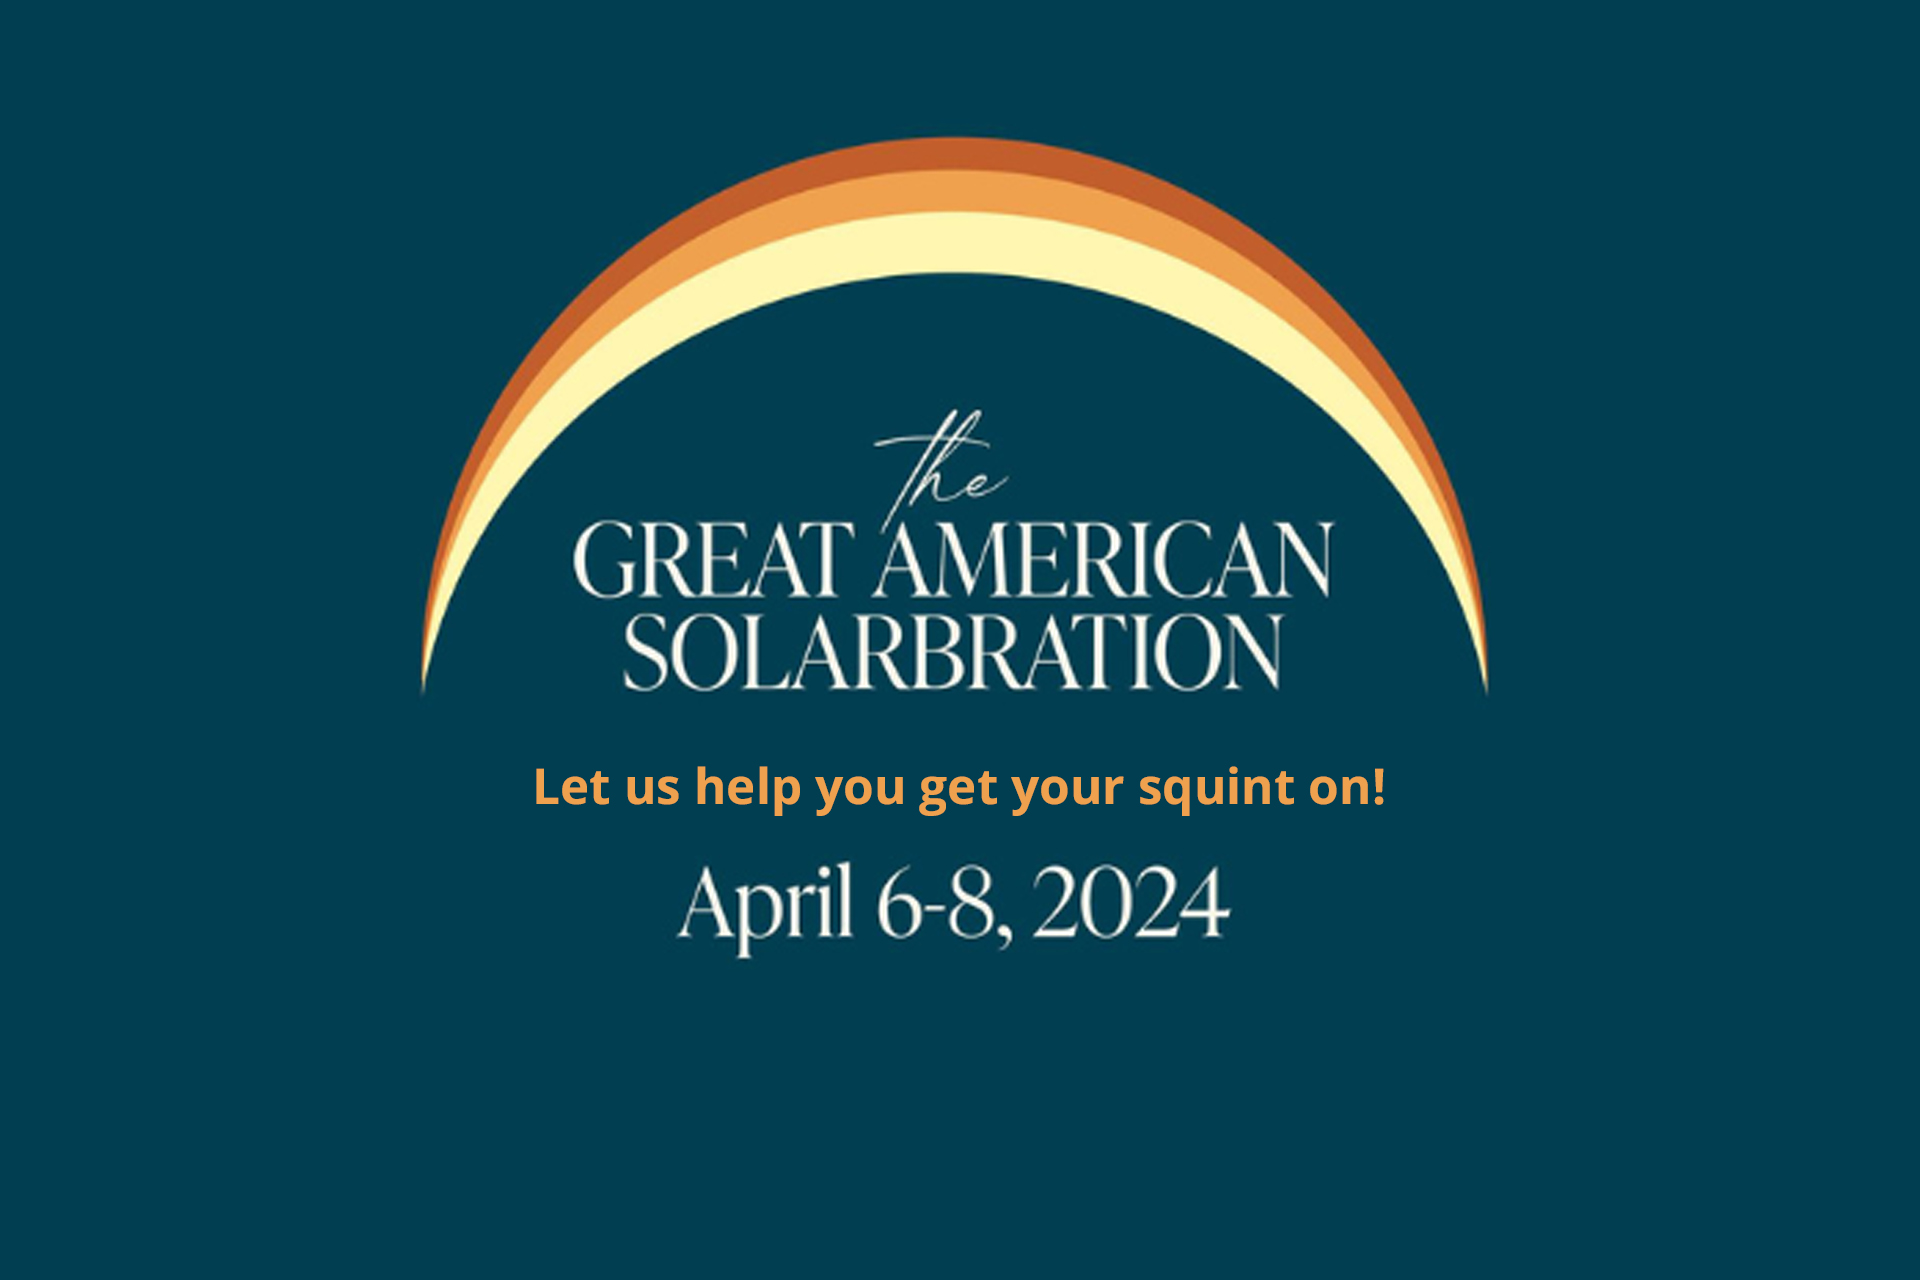 Get your squint on! Solarbration 2024 is here!